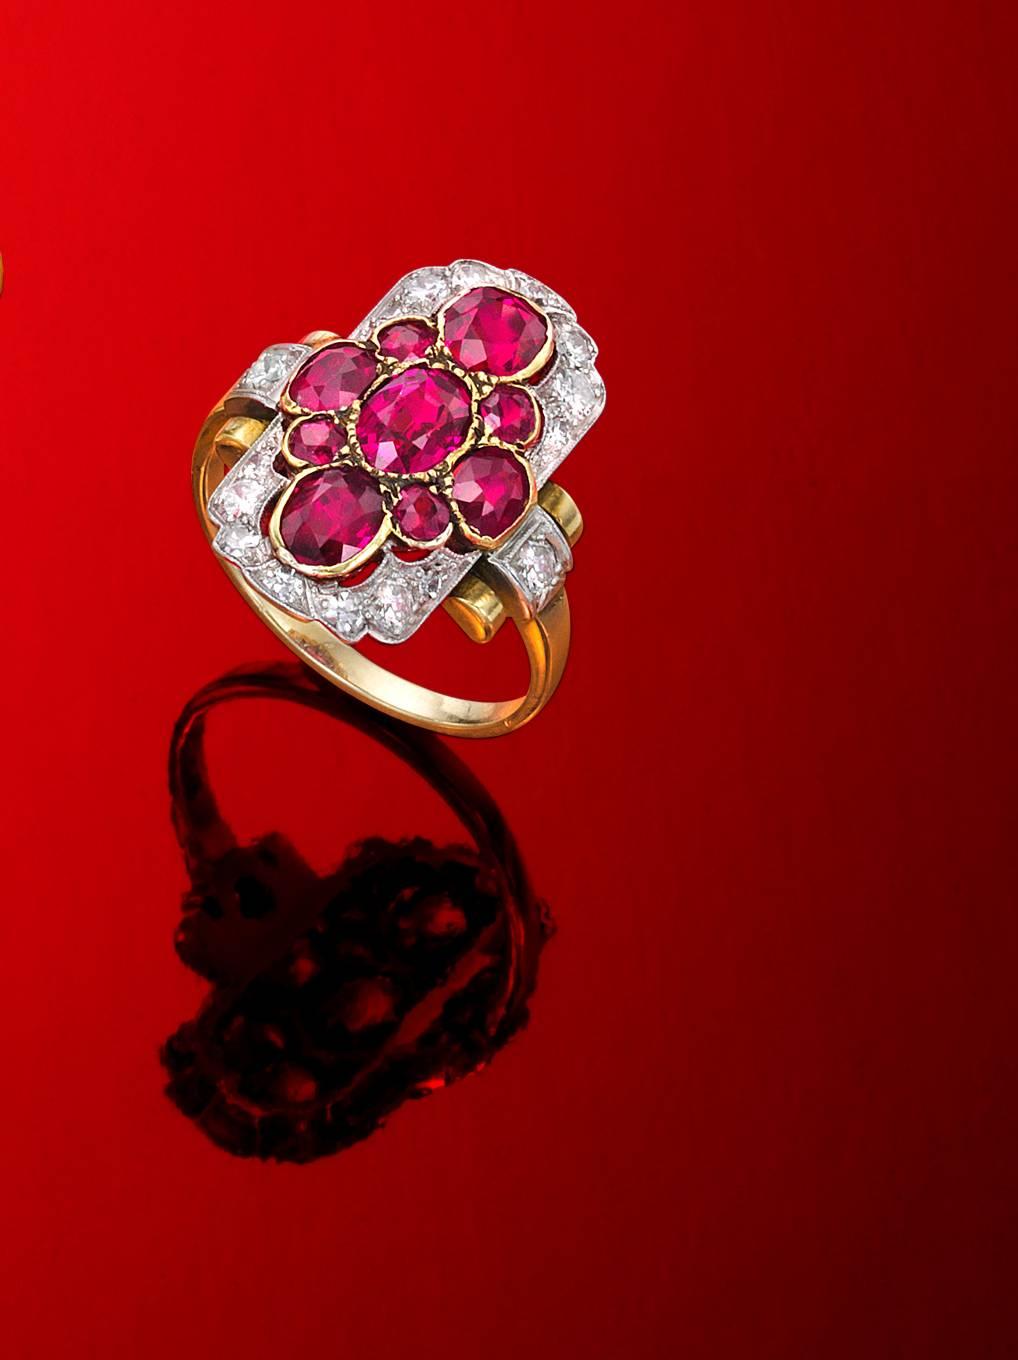 Wonderful natural unheated Burma rubies and surrounded by old cut diamonds.  This Belle Epoque ring is platinum on gold.  There are 9 fine rubies amounting to approximately 2.25 cts., and 16 diamonds amounting to approximately .50 cts.  This ring is